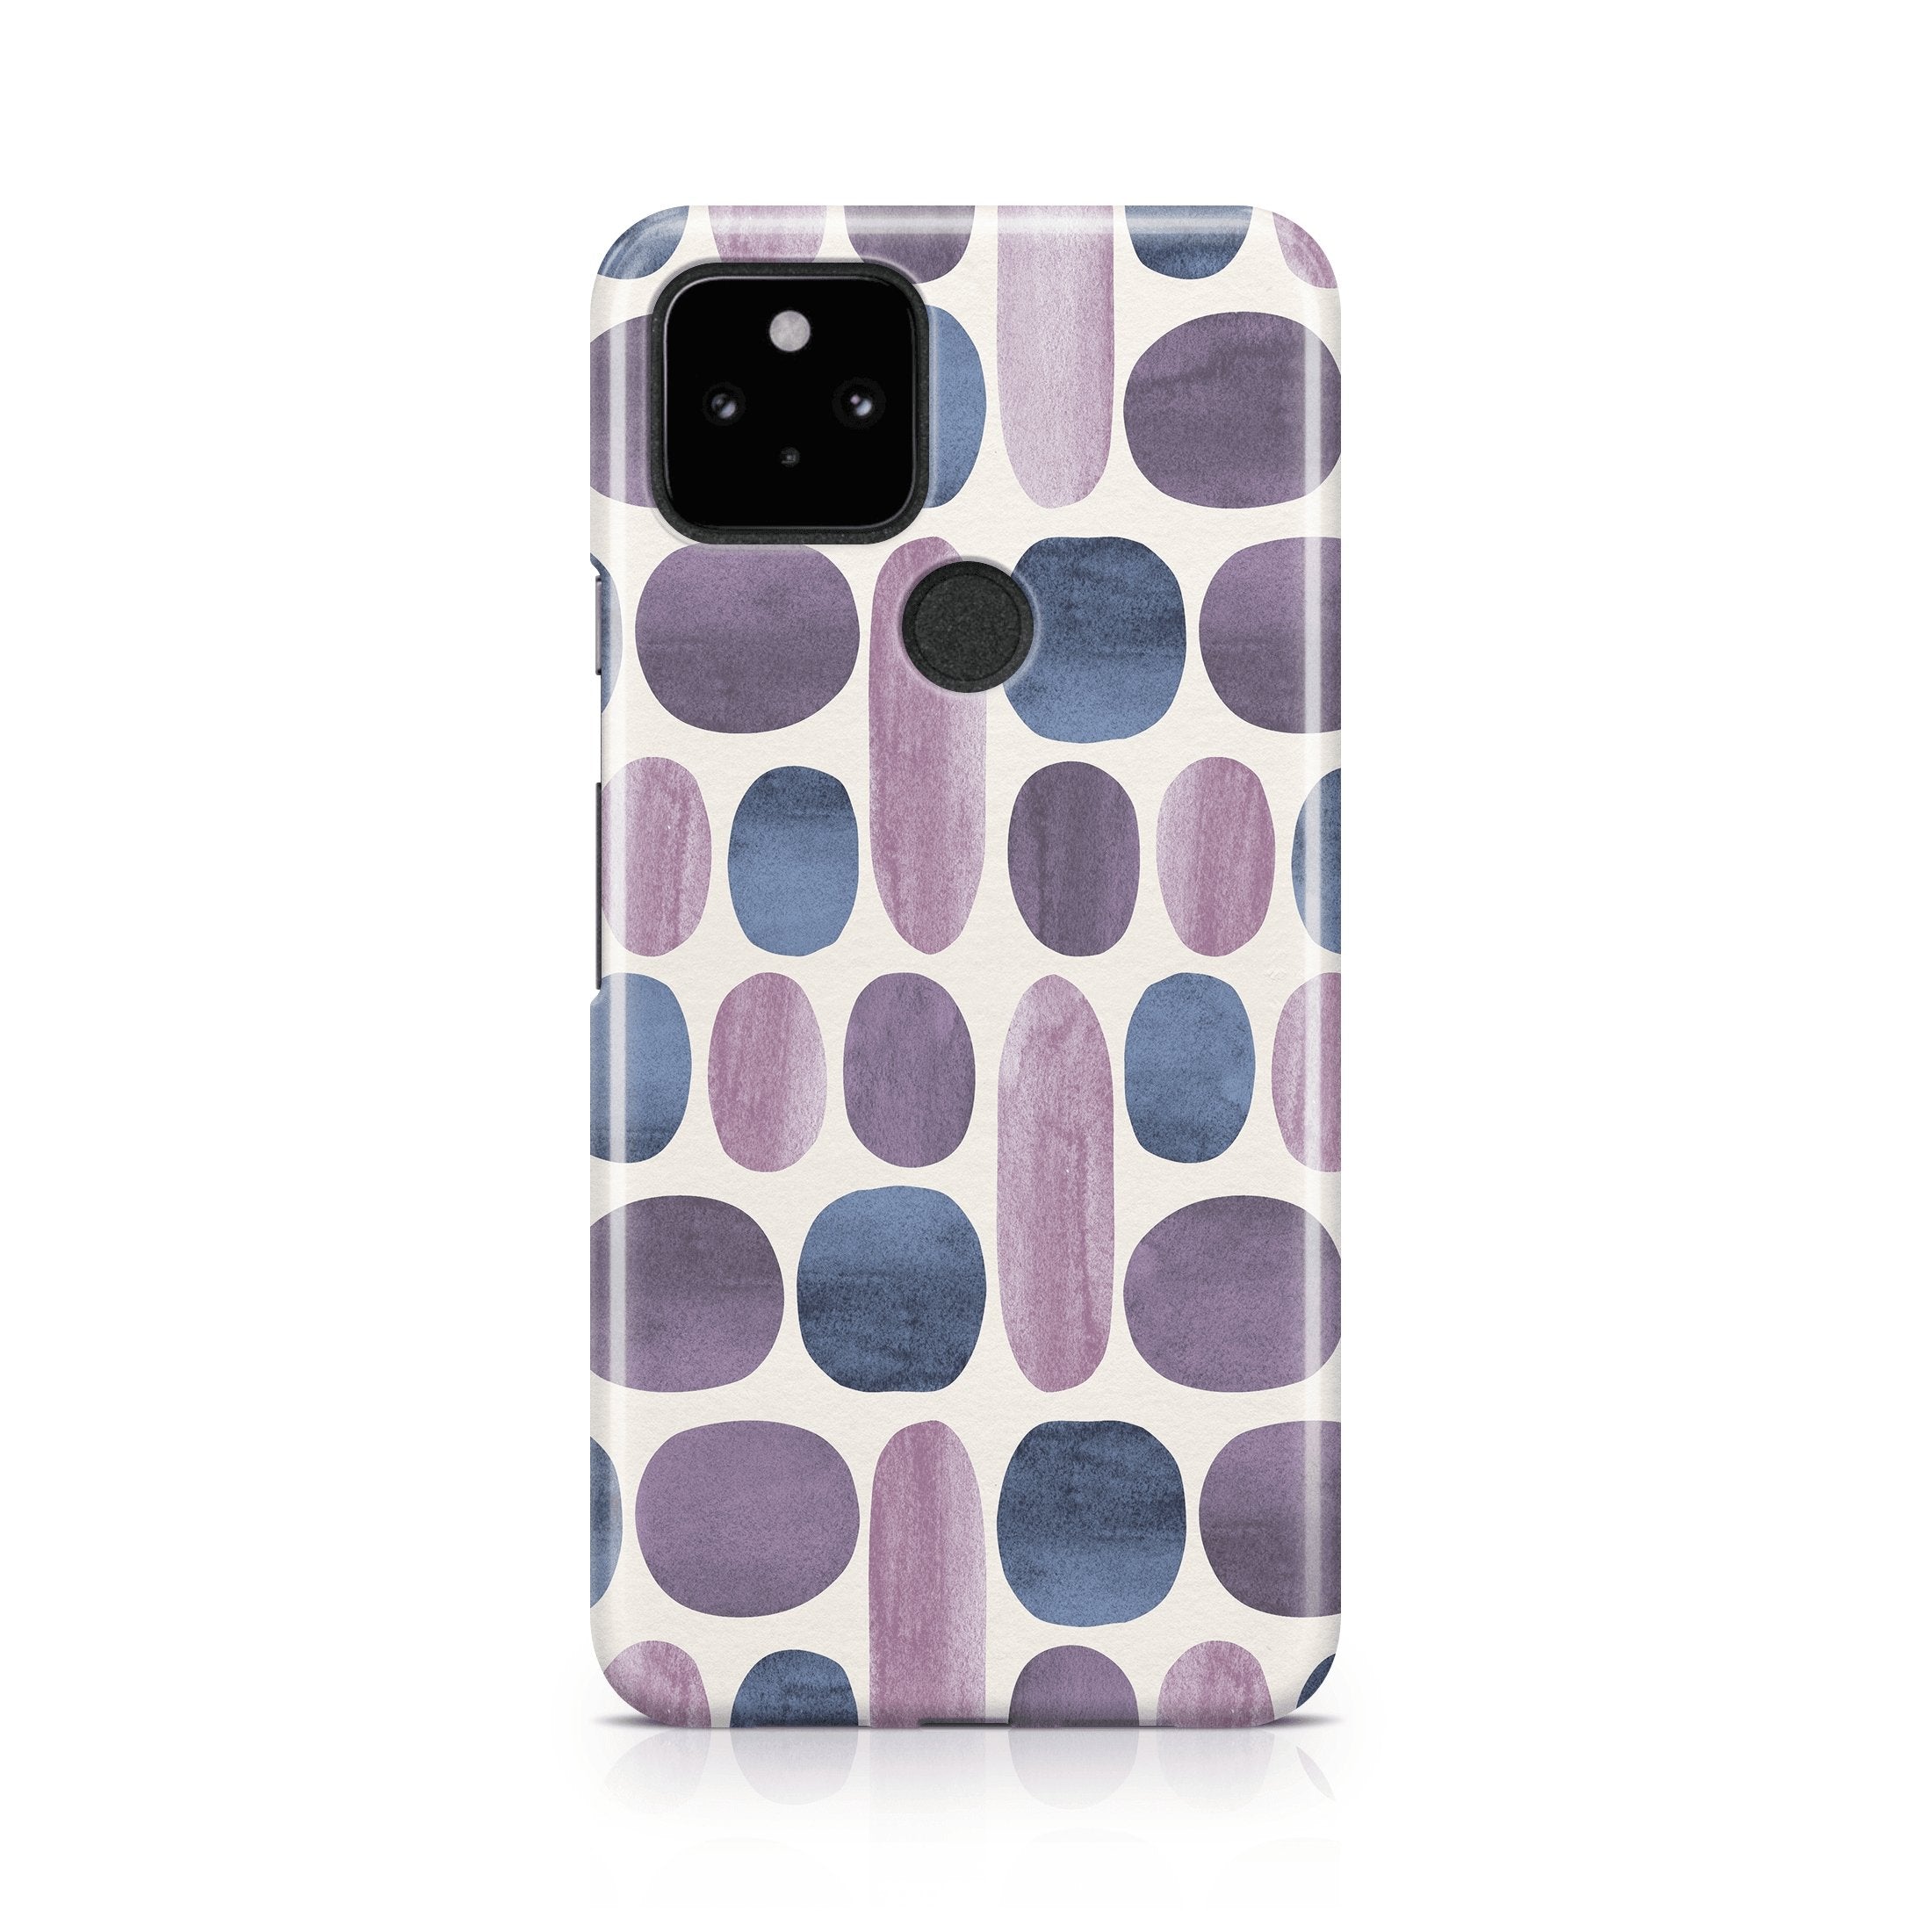 Indigo & Orchids - Google phone case designs by CaseSwagger